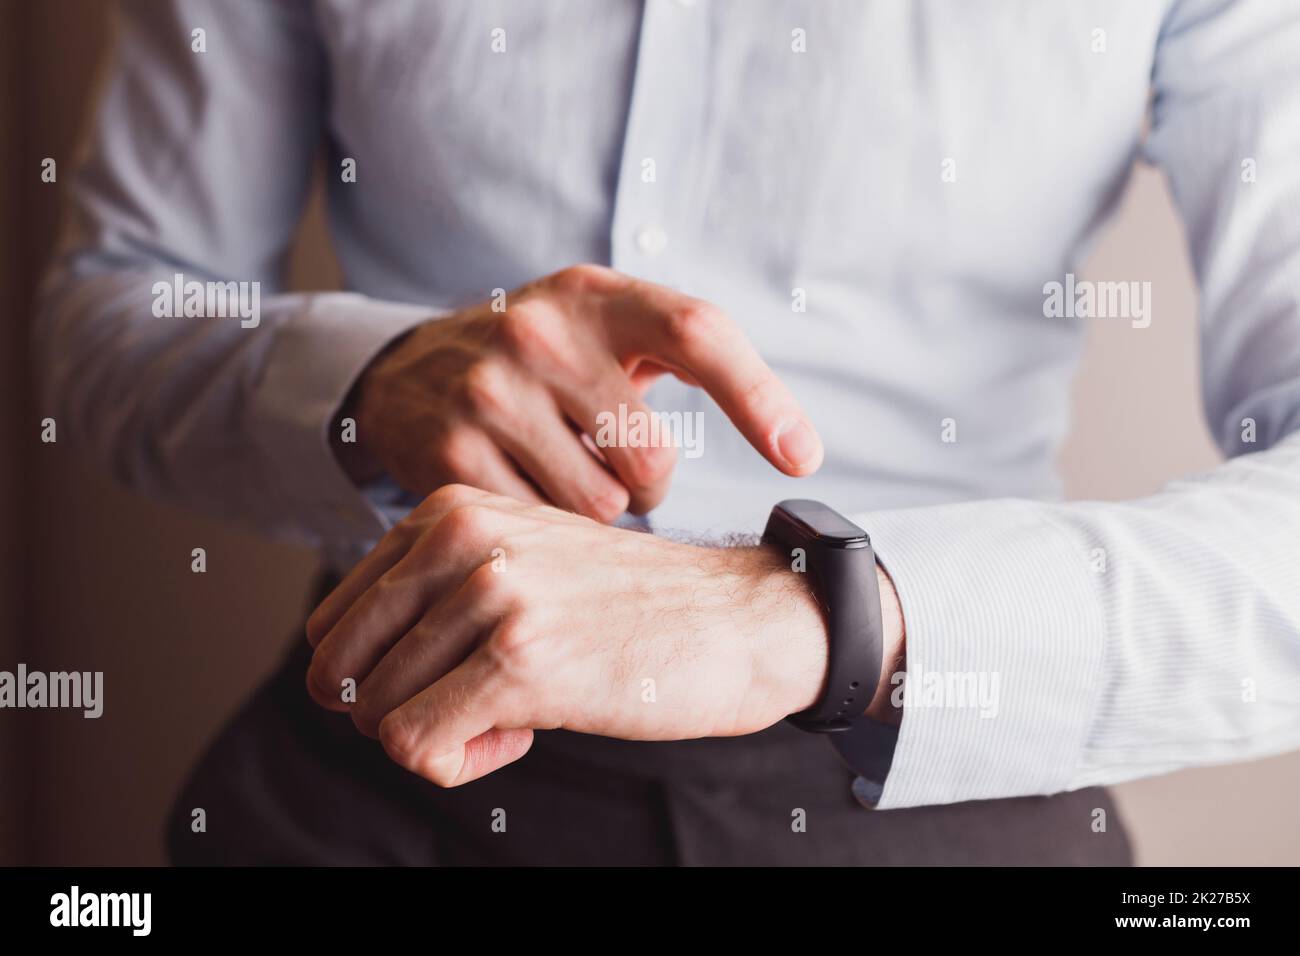 Office man in blue shirt, using smart watch or bracelet. Technology lifestyle Stock Photo